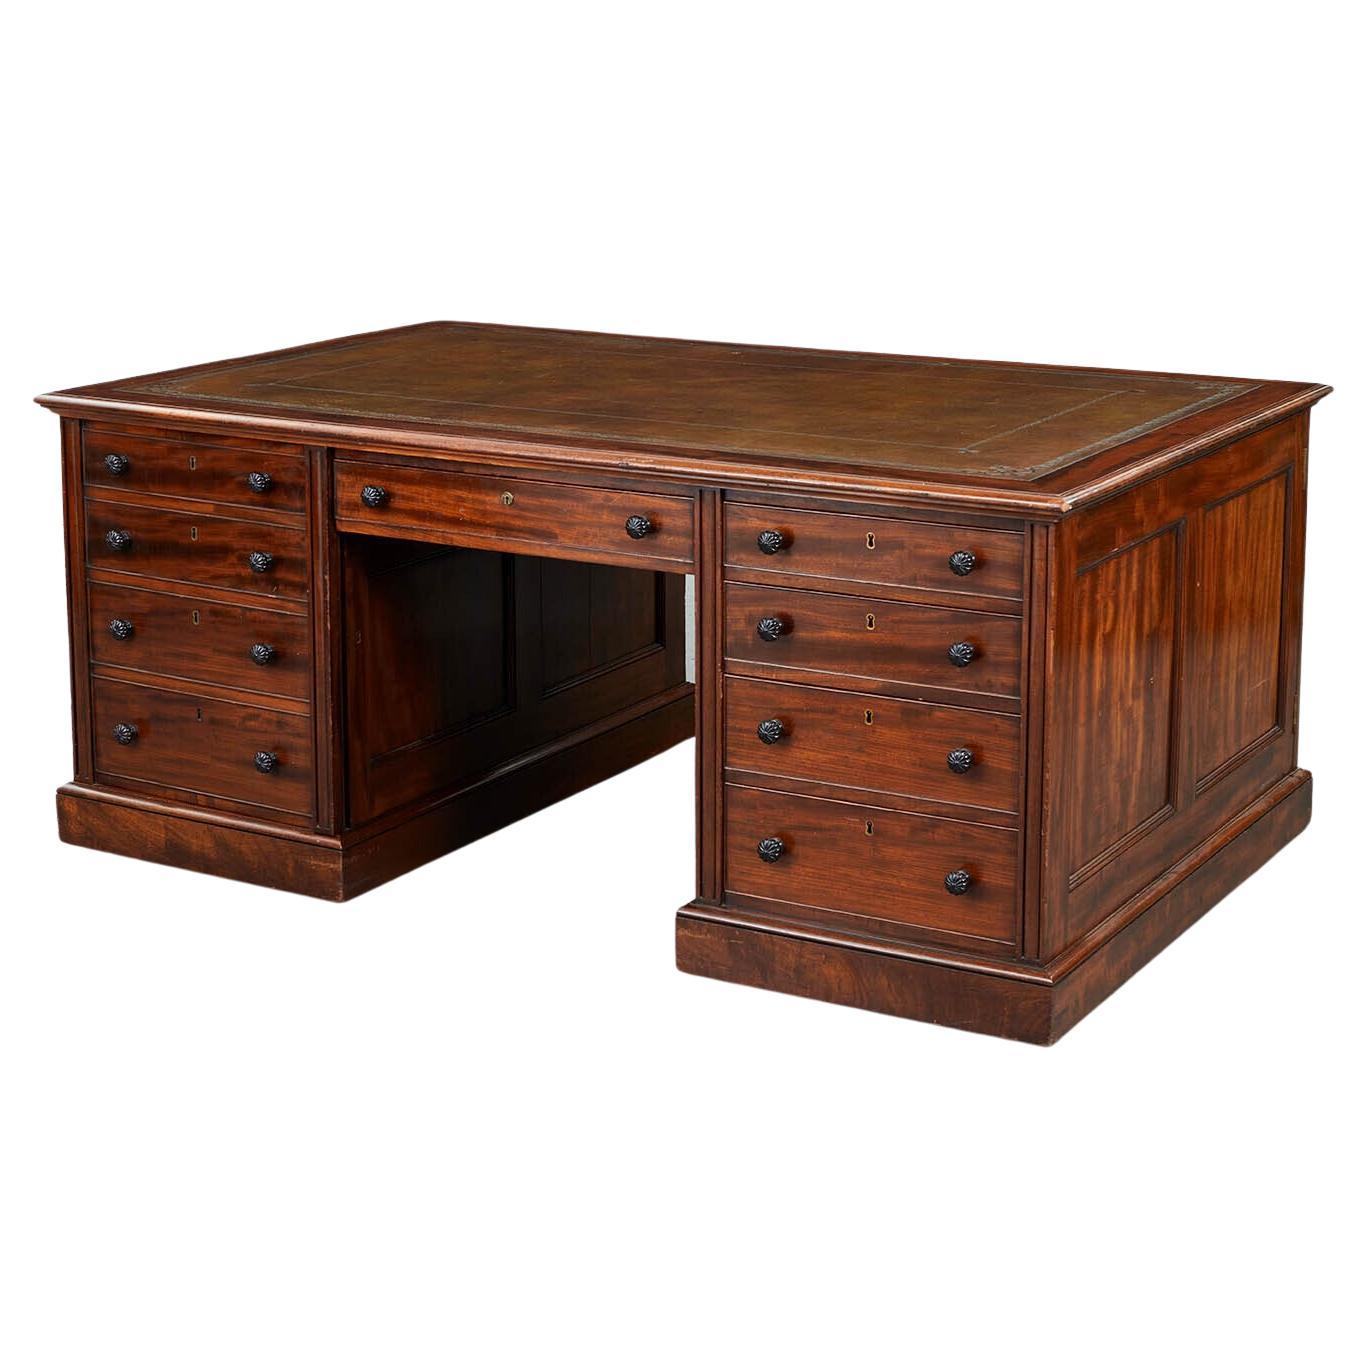 Very Fine George IV Mahogany and Ebony Partners Desk by Gillows For Sale